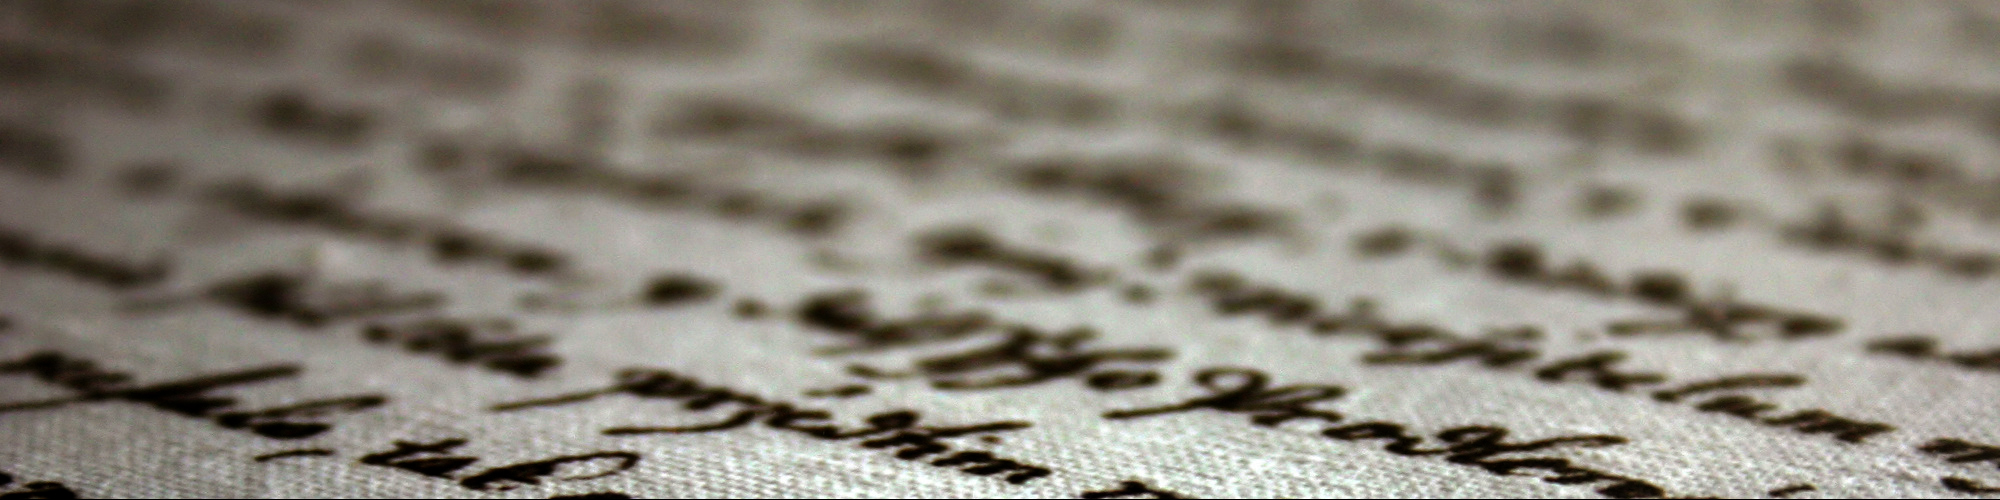 Close up of Old Calligraphy Writing